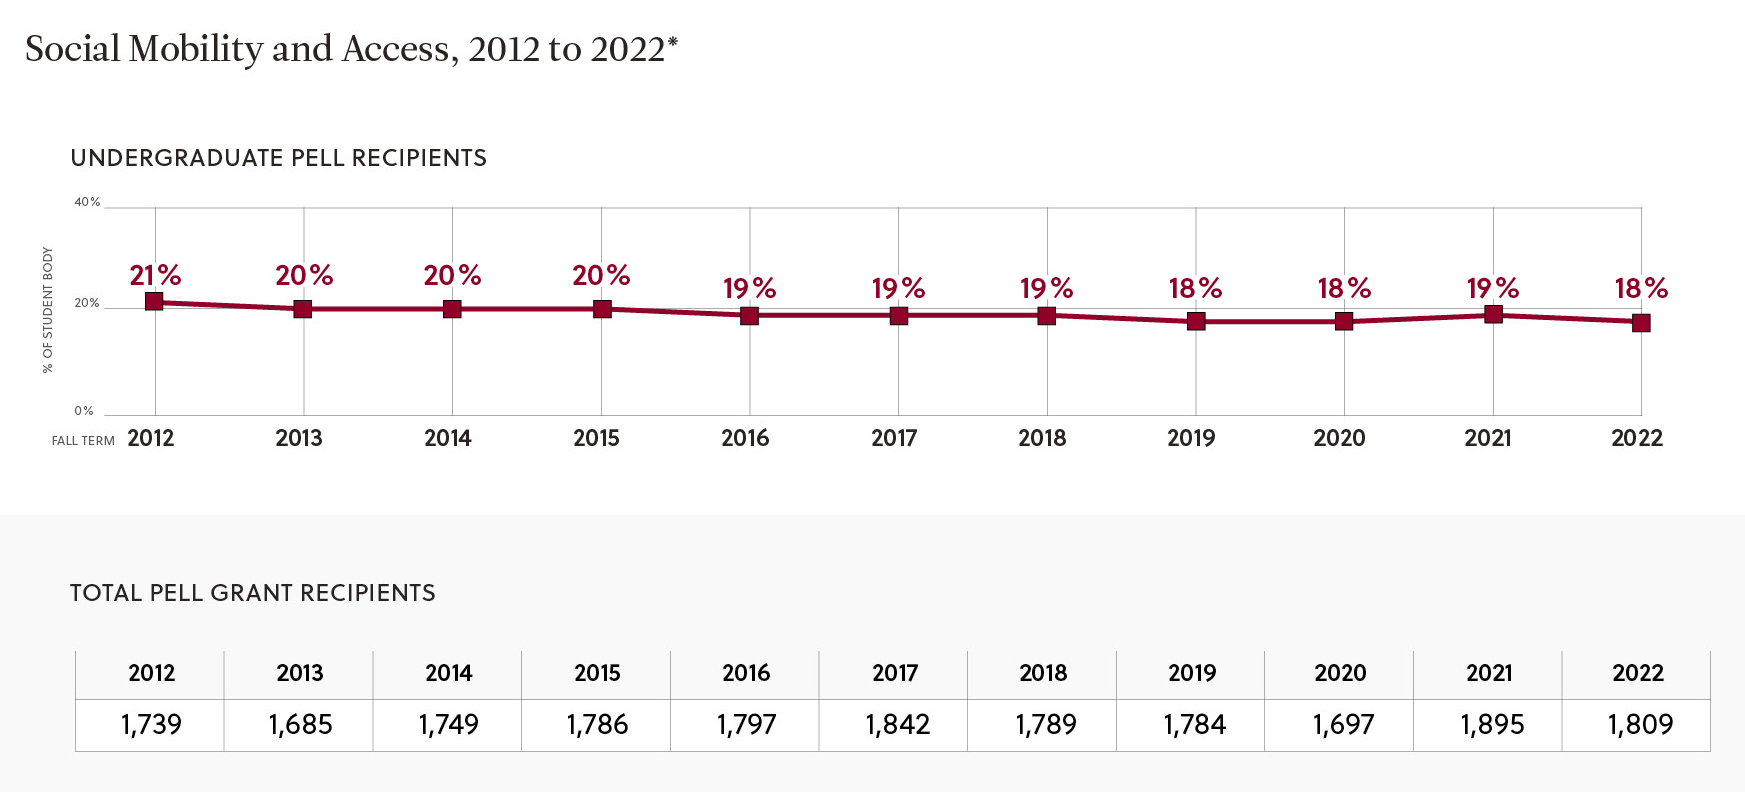 Social Mobility and Access Chart 2021-2022